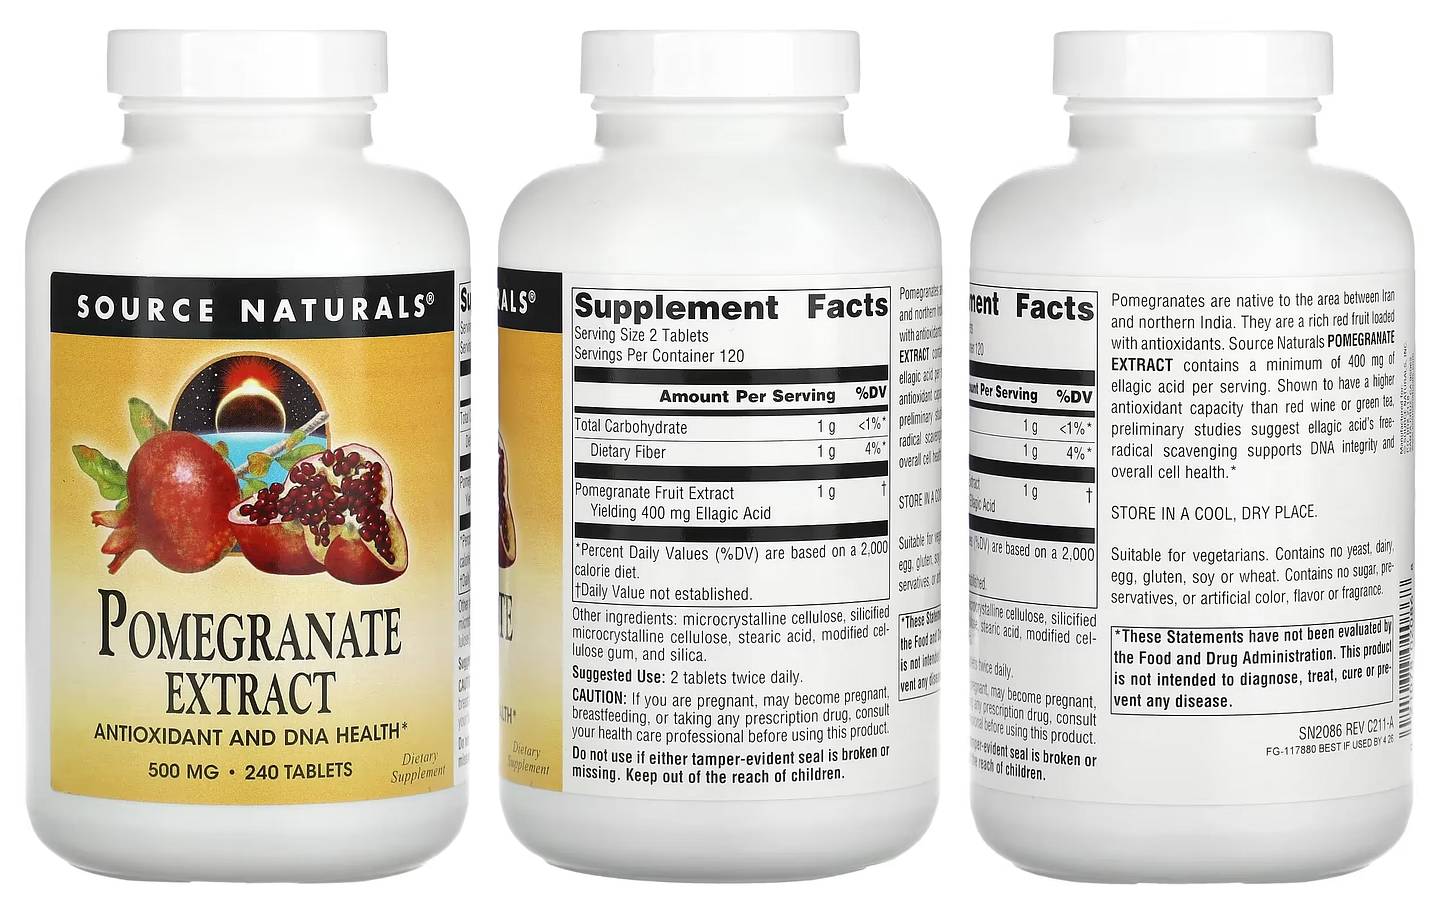 Source Naturals, Pomegranate Extract packaging